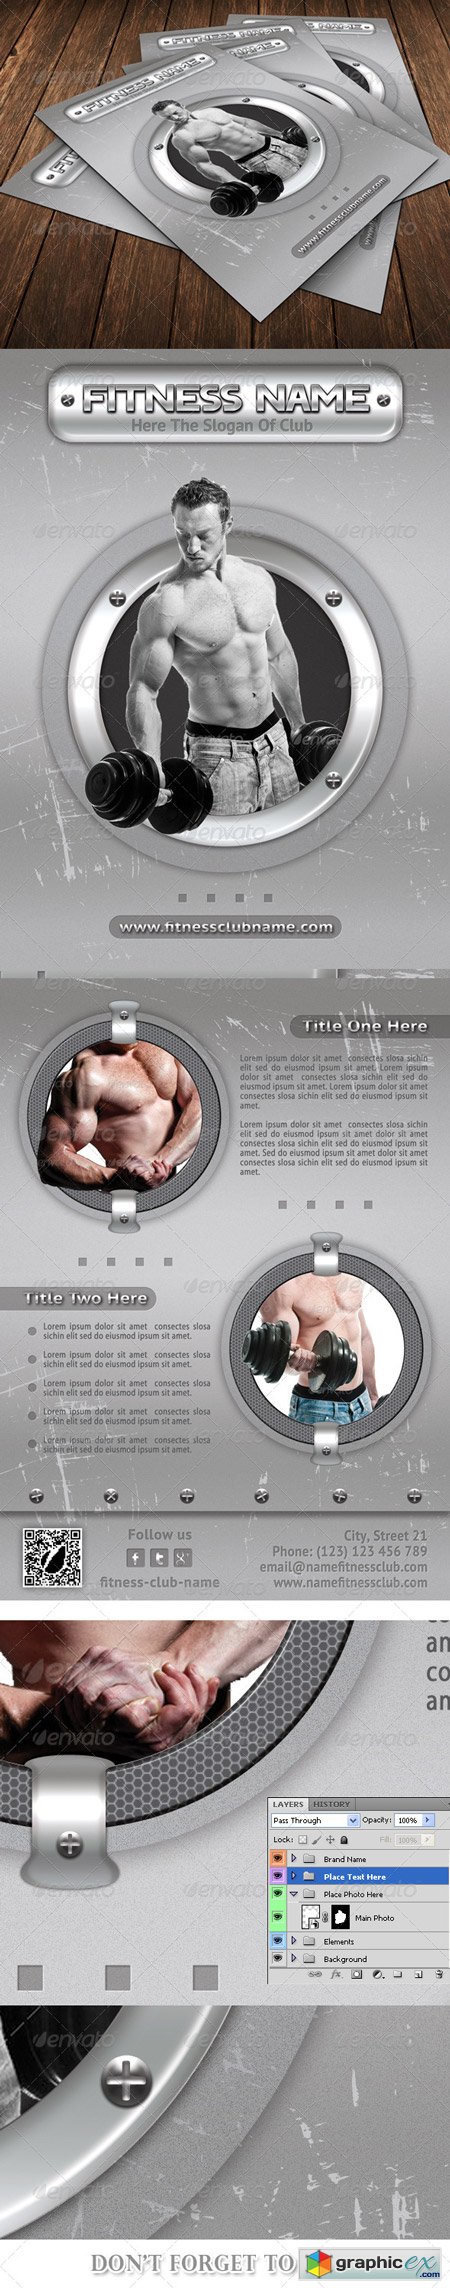 Fitness and Bodybuilding 2 Sides Flyer Template 09